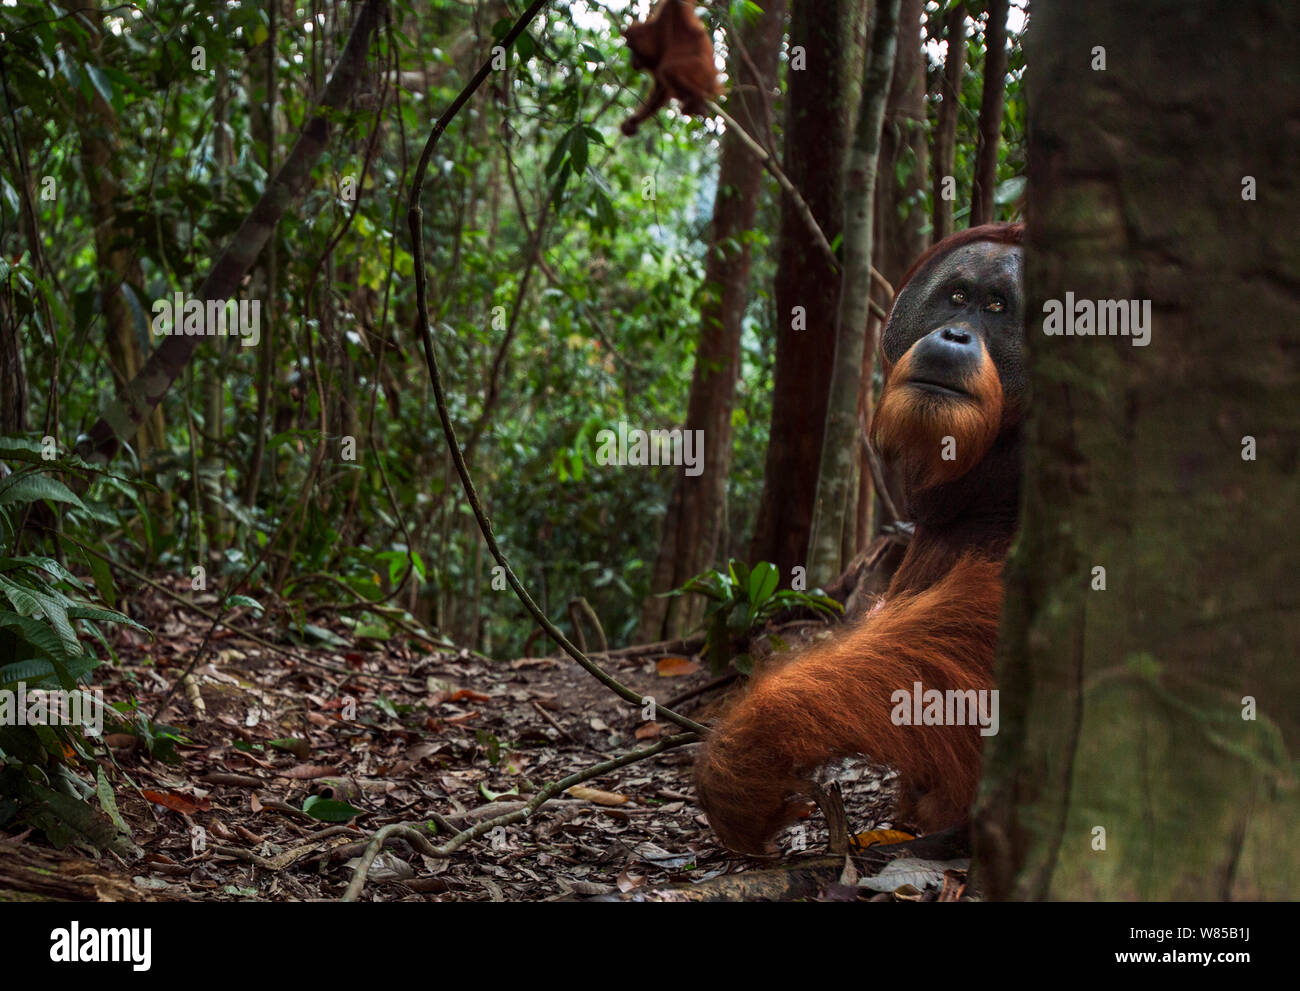 Sumatran orangutan (Pongo abelii) mature male 'Halik' aged 26 years peering from behind a tree. Gunung Leuser National Park, Sumatra, Indonesia. Rehabilitated and released (or descended from those which were released) between 1973 and 1995. Stock Photo